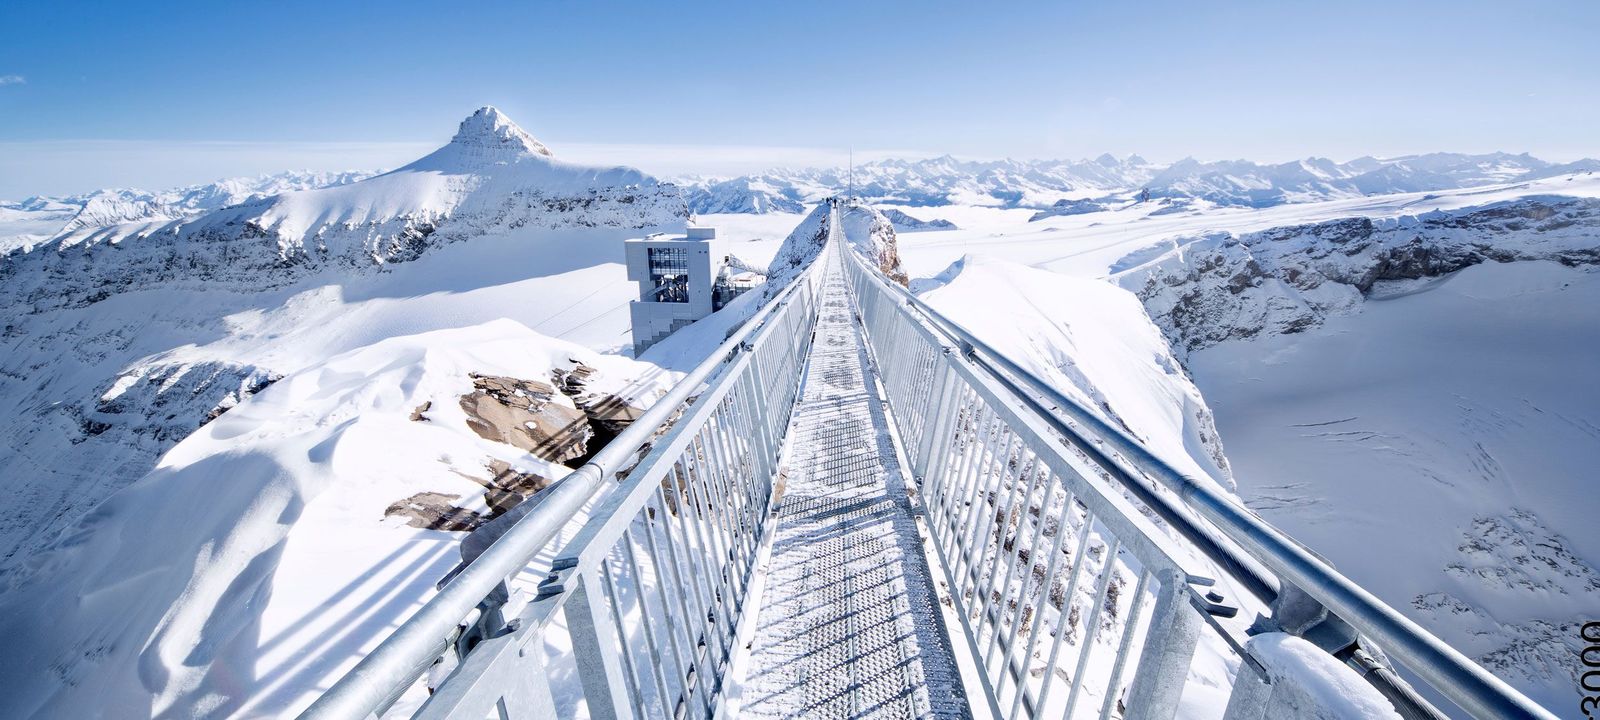 A walkway in the snowy mountains